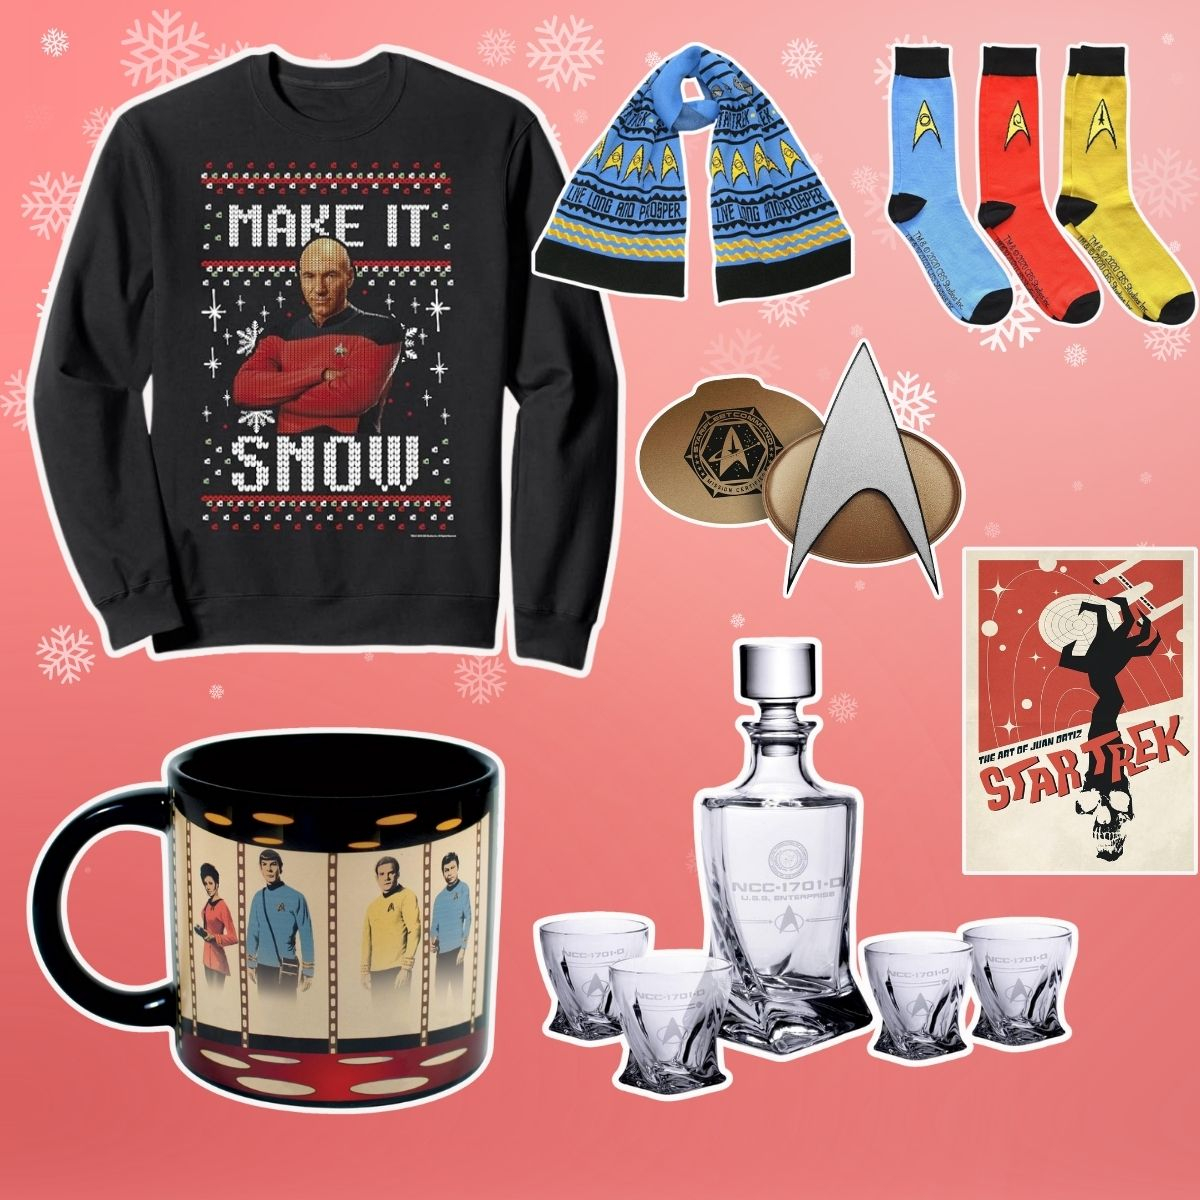 The coolest unique Star Trek gifts for the holidays